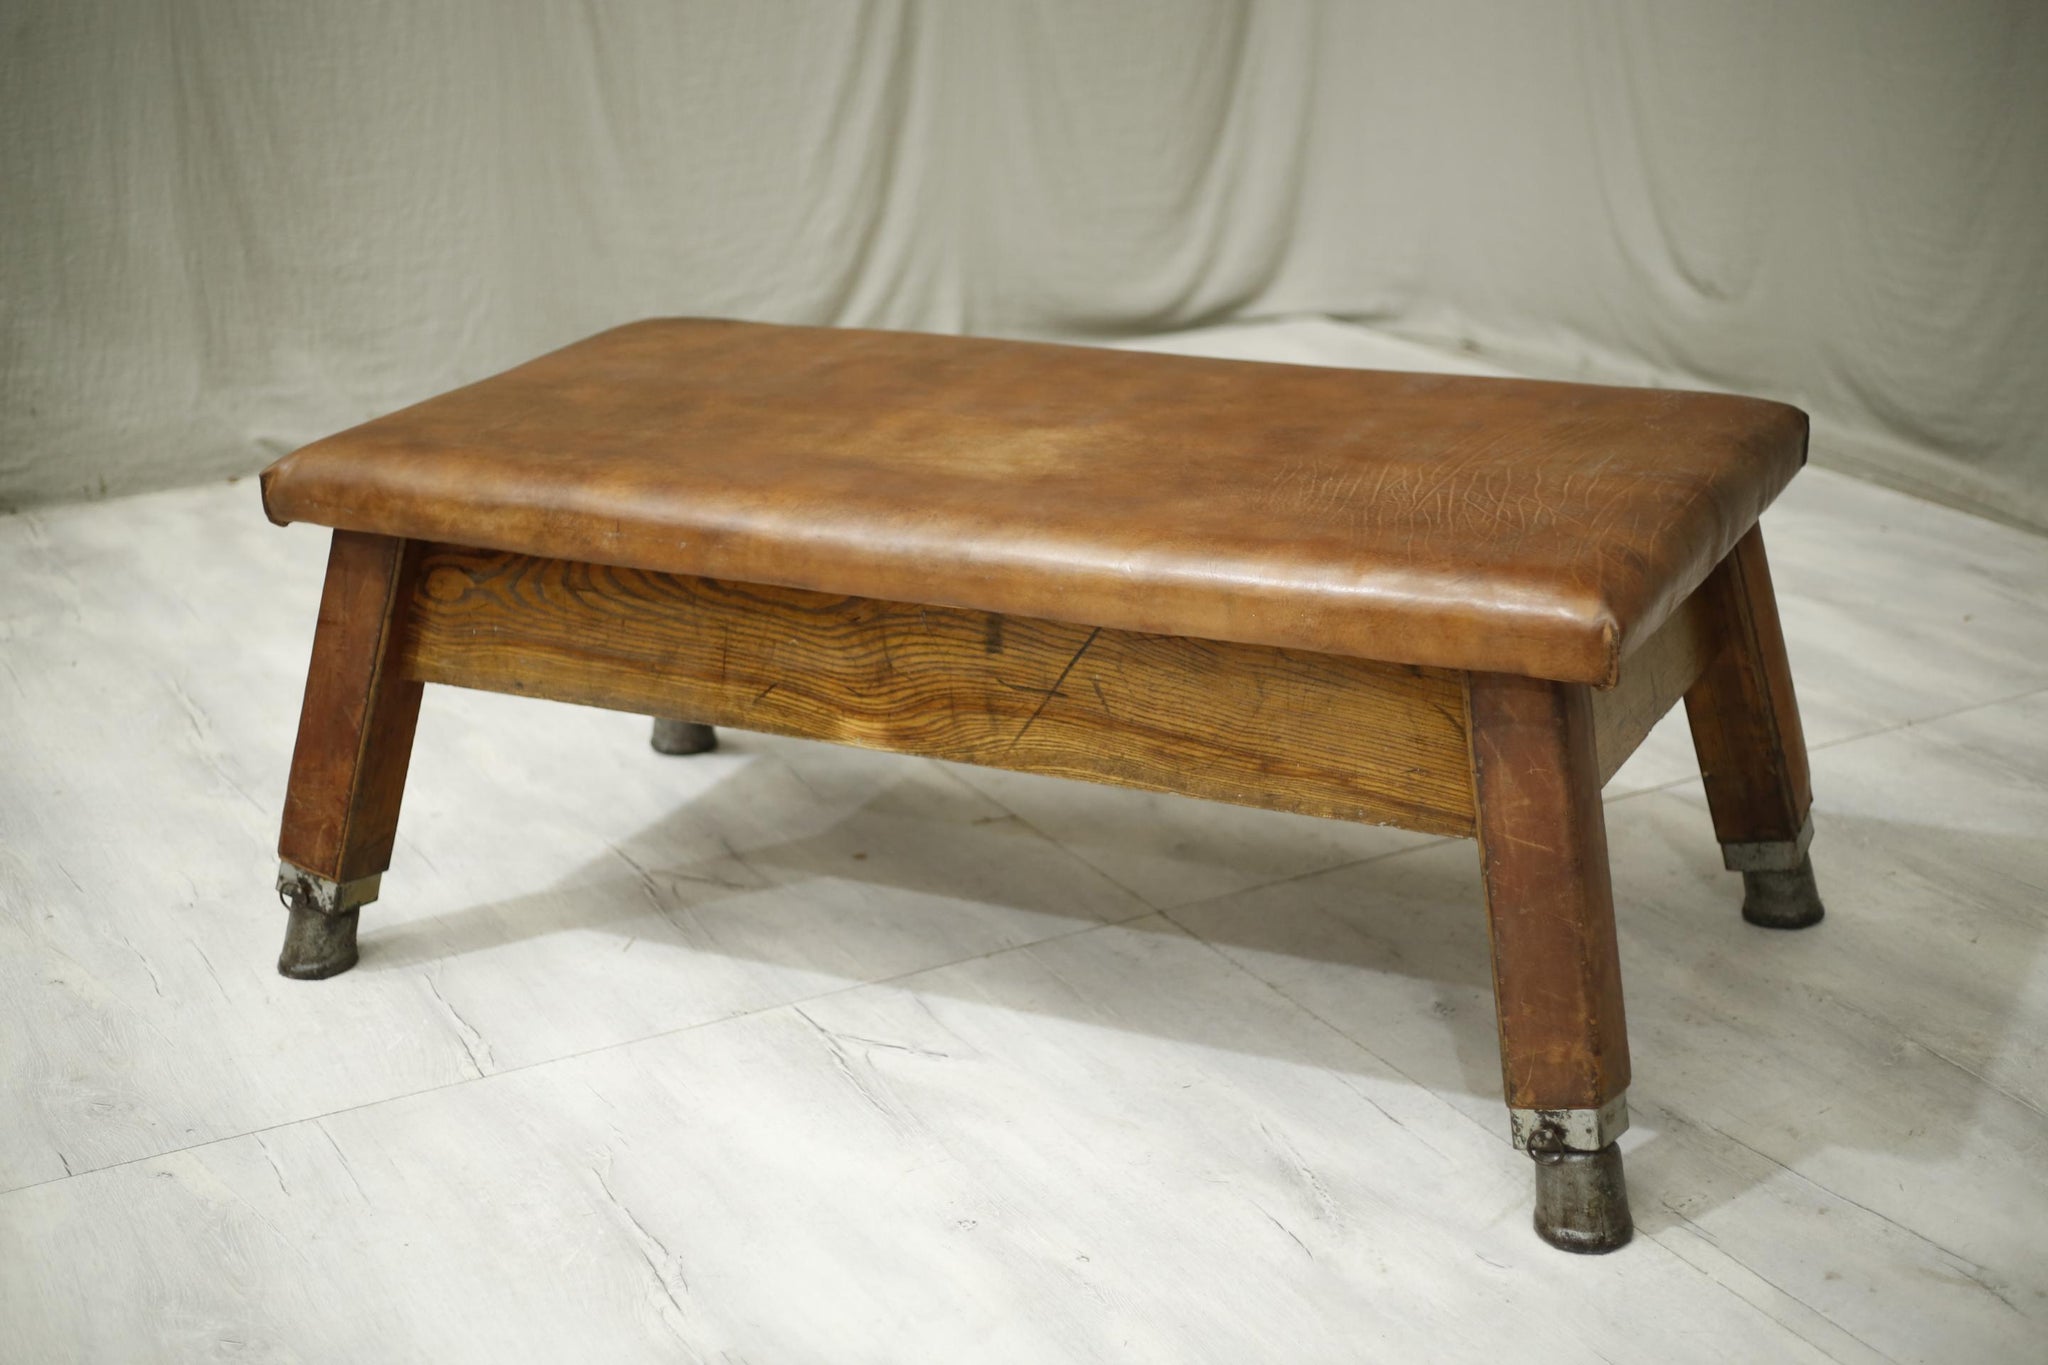 Vintage 20th century leather gym bench coffee table